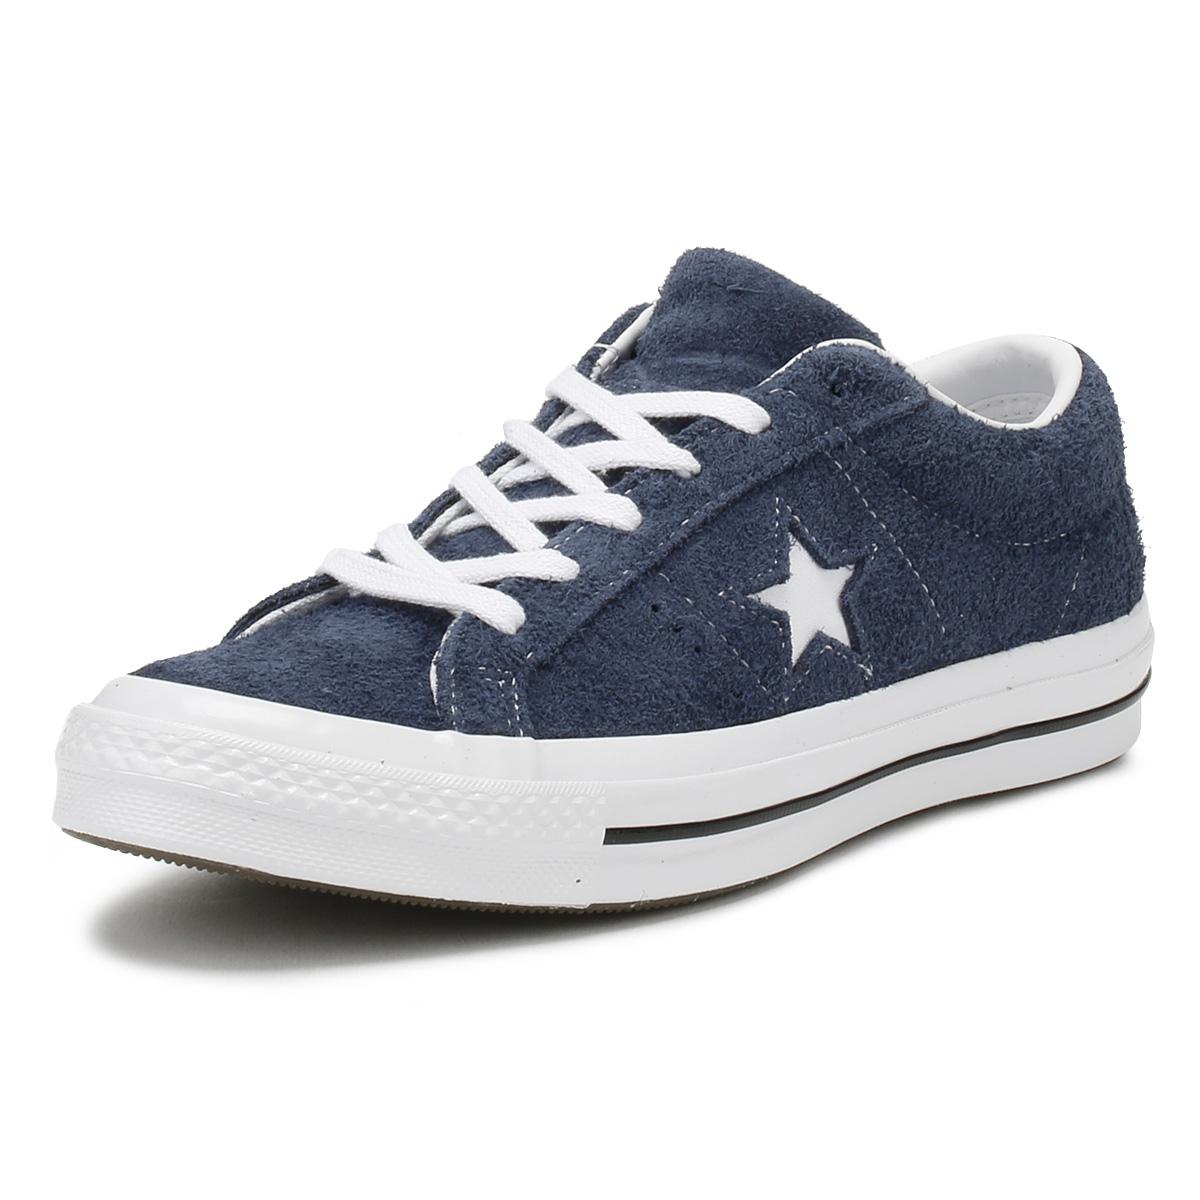 Converse One Star Navy Premium Suede Ox Trainers in Blue for Men - Lyst